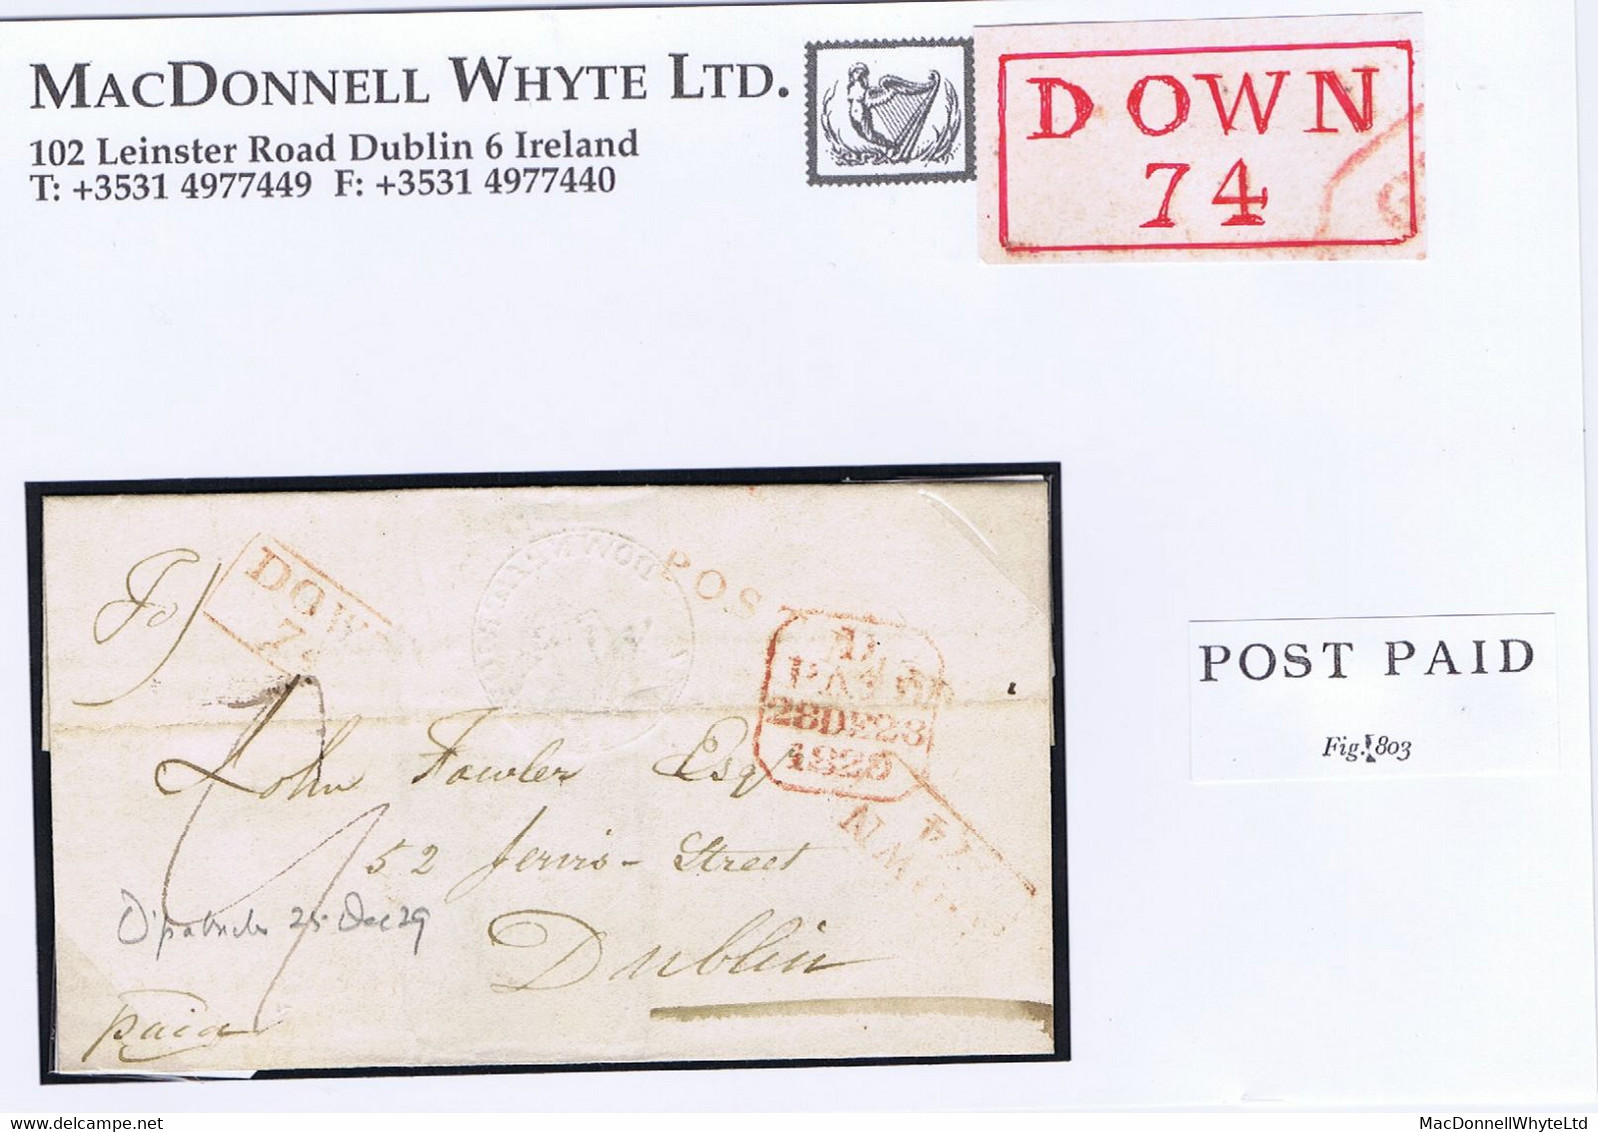 Ireland Down 1829 Cover Downpatrick To Dublin At 9d, With Unframed POST PAID Of Down And Matching Boxed DOWN/74 - Préphilatélie